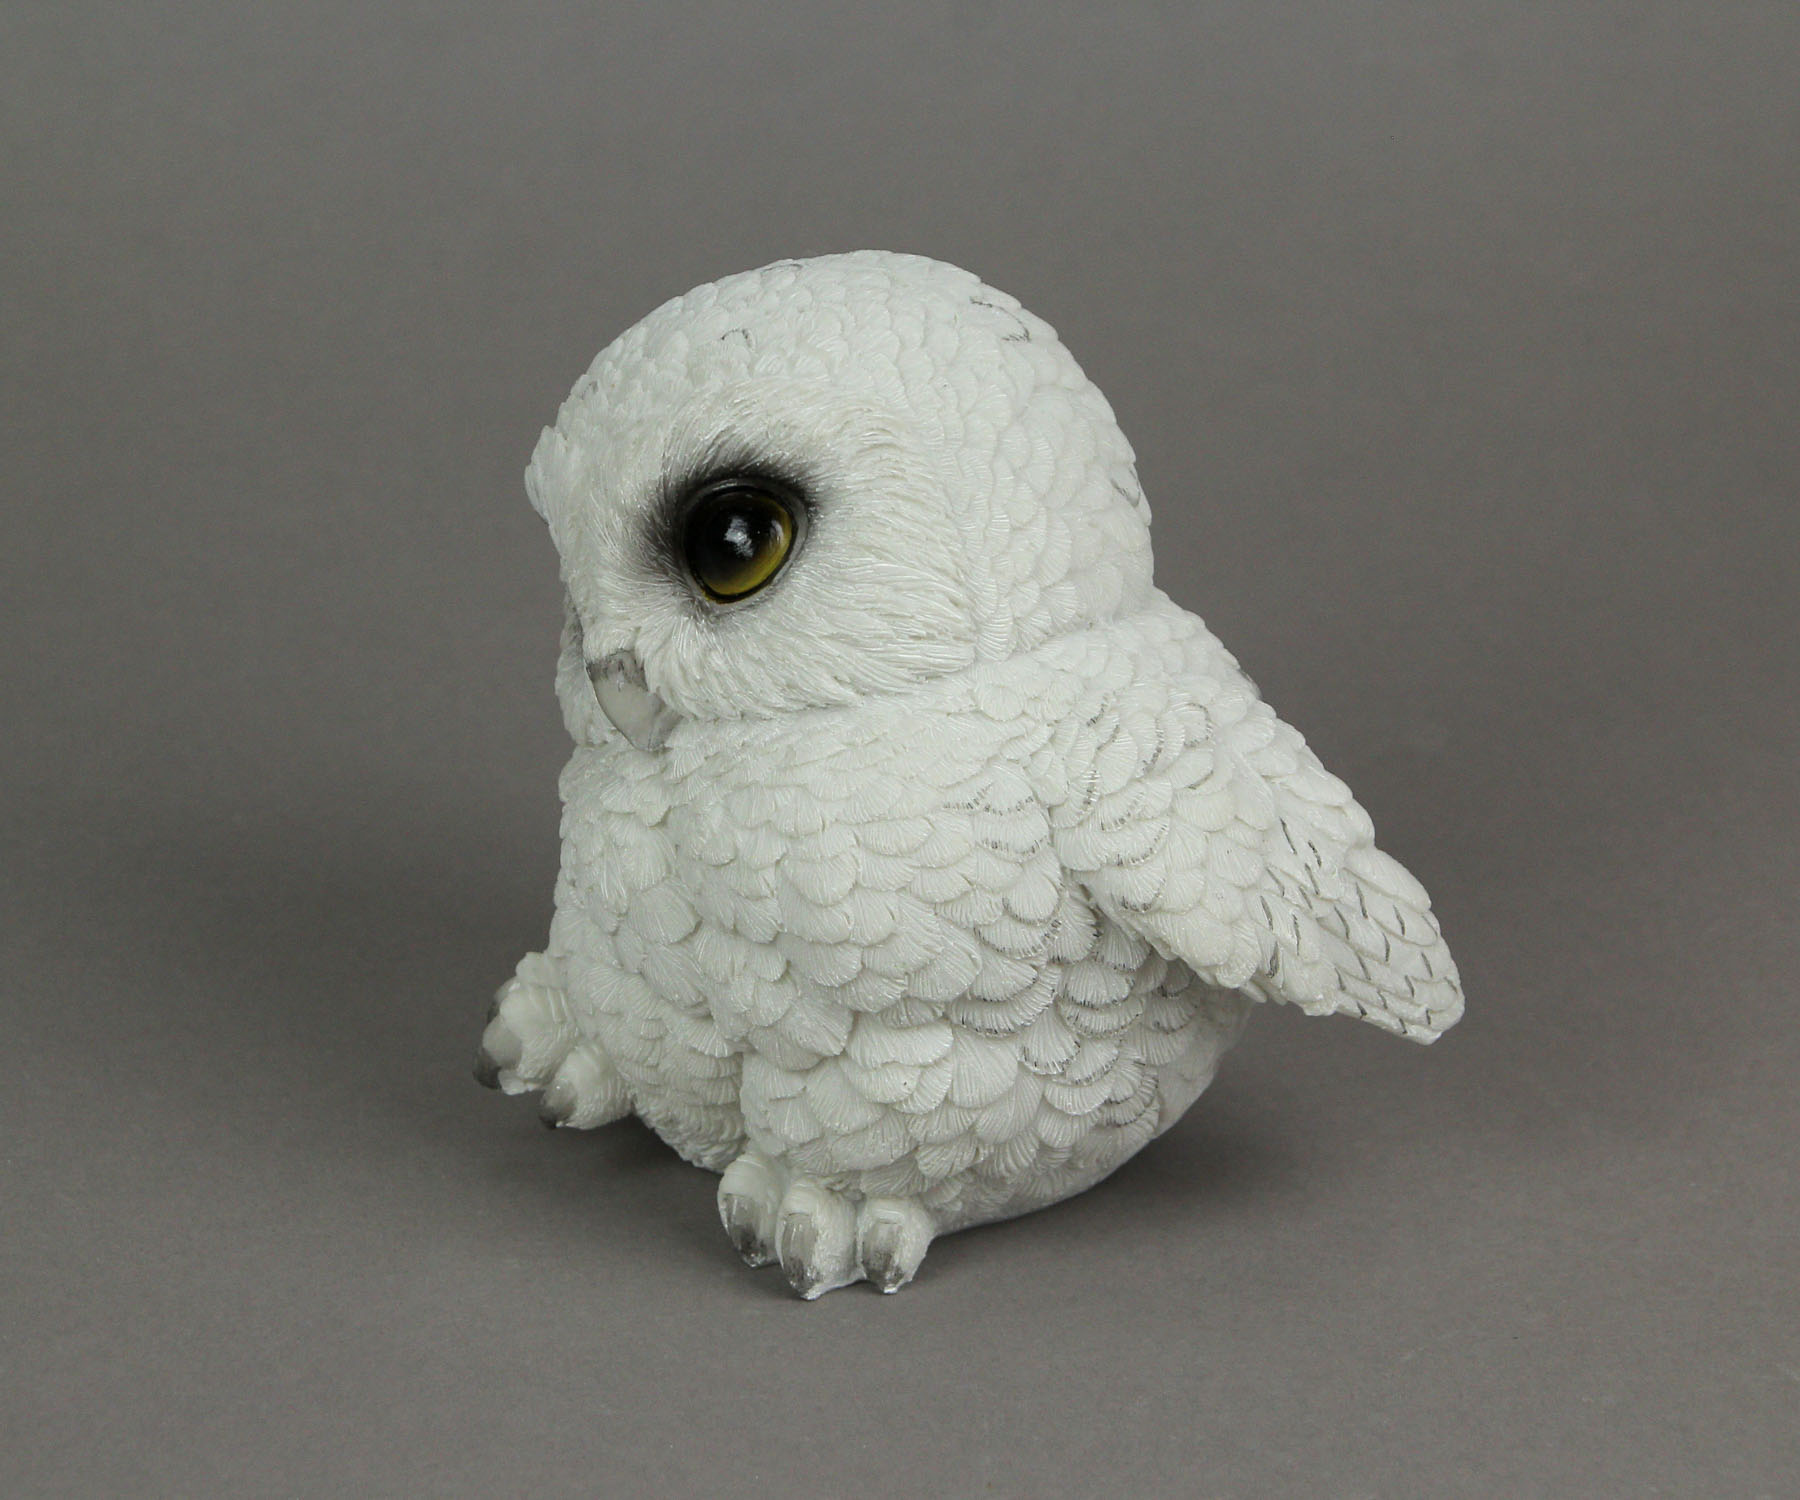 Everspring Adorable Big Eyed White Baby Snowy Owl Mini Statue 4.75 inches High - image 2 of 4